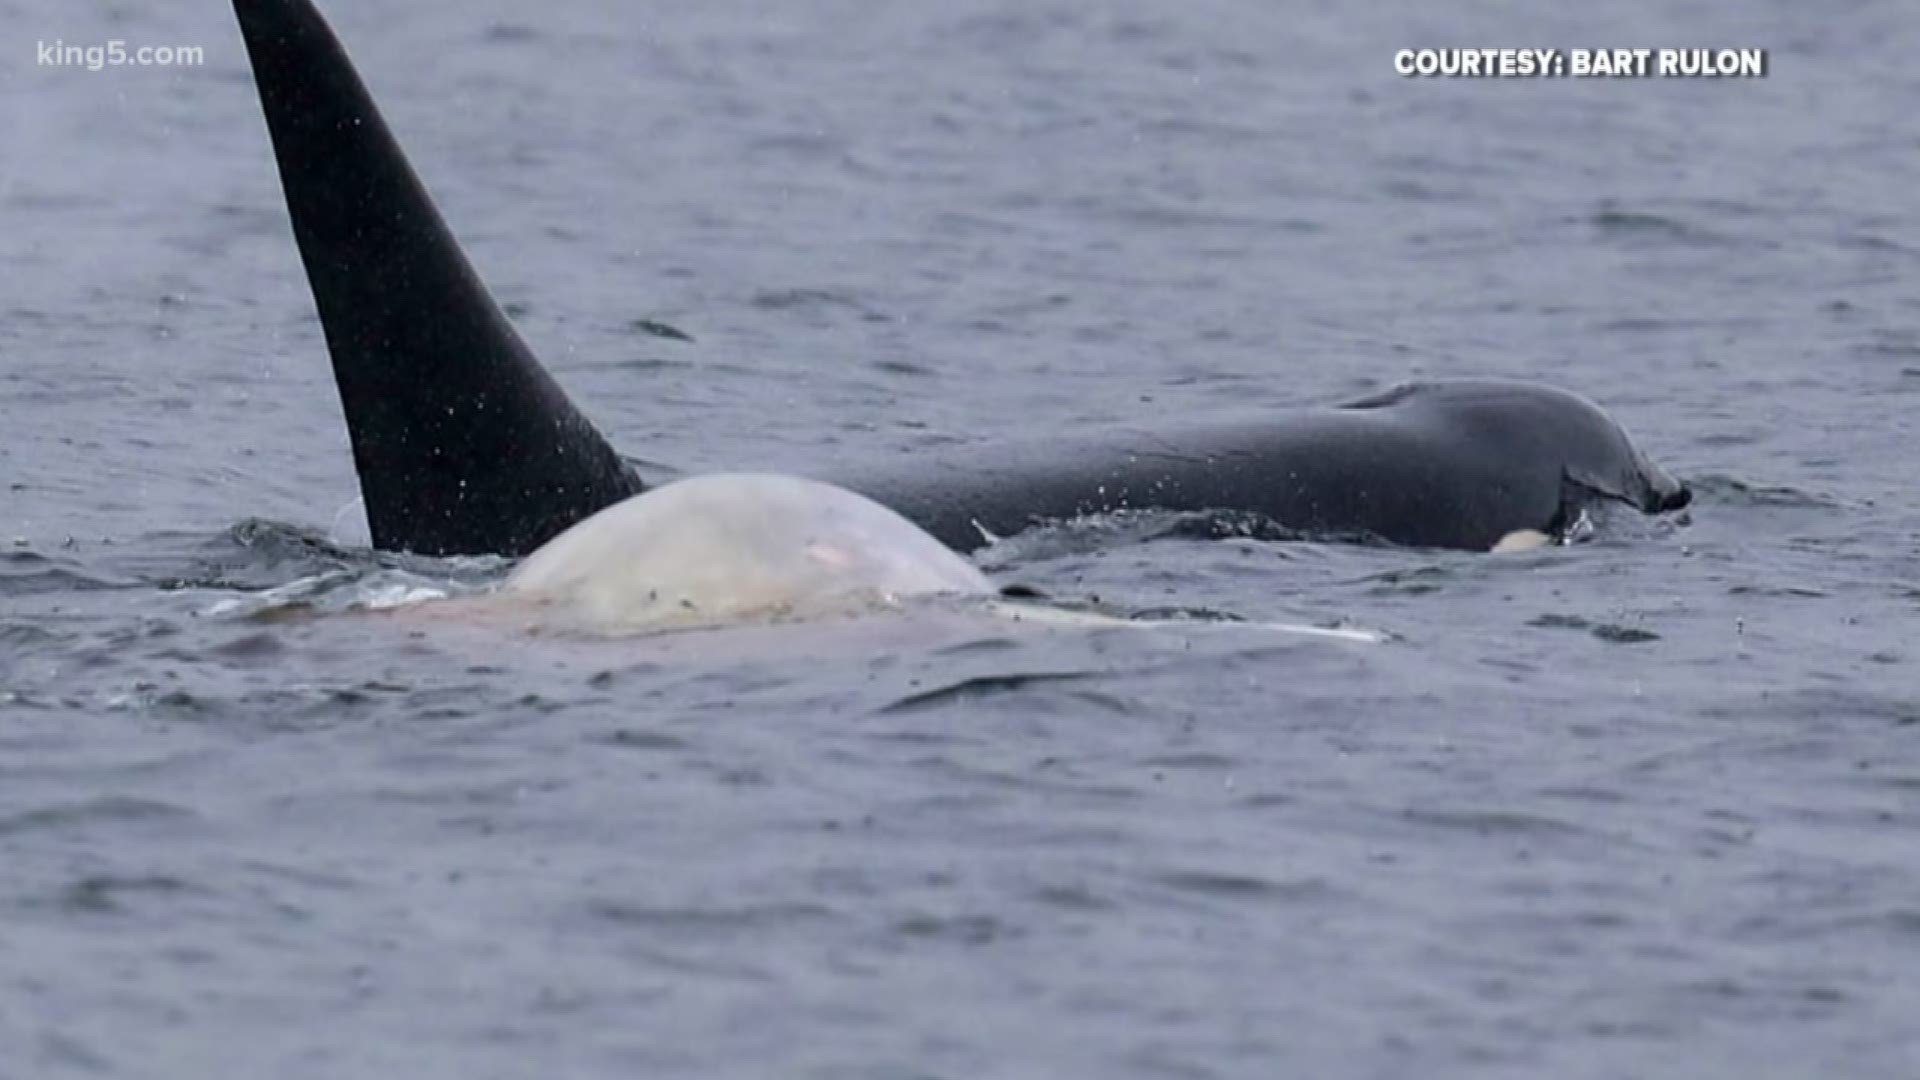 Transient orcas were photographed feeding on a gray whale in Puget Sound. Photos by Naturalist Bart Rulon aboard the Puget Sound Express.